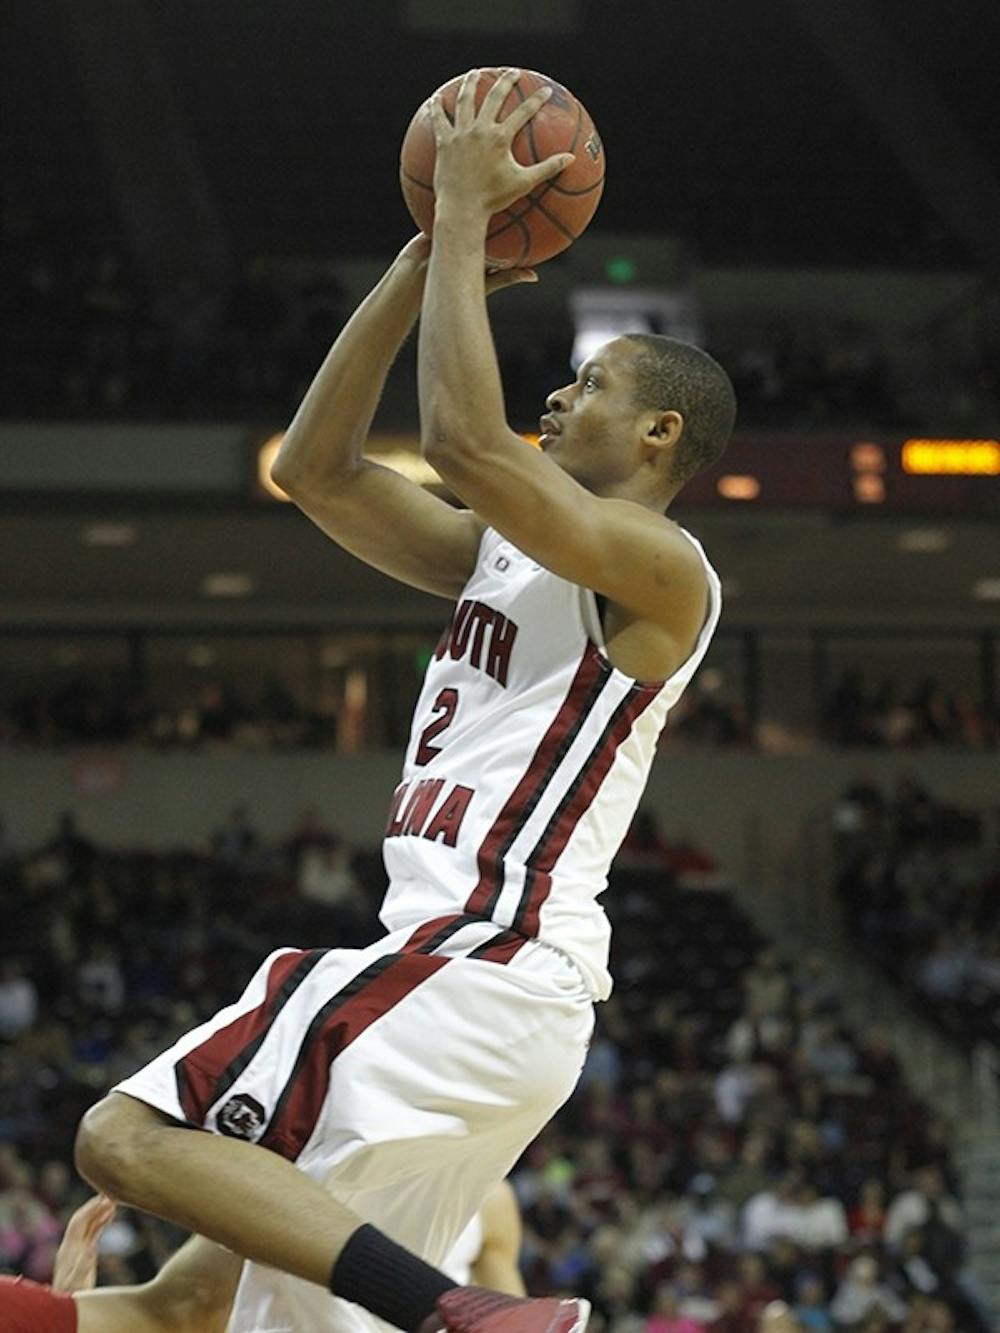 Junior guard  Brian Richardson tied a career-high with 20 points against the Razorbacks.